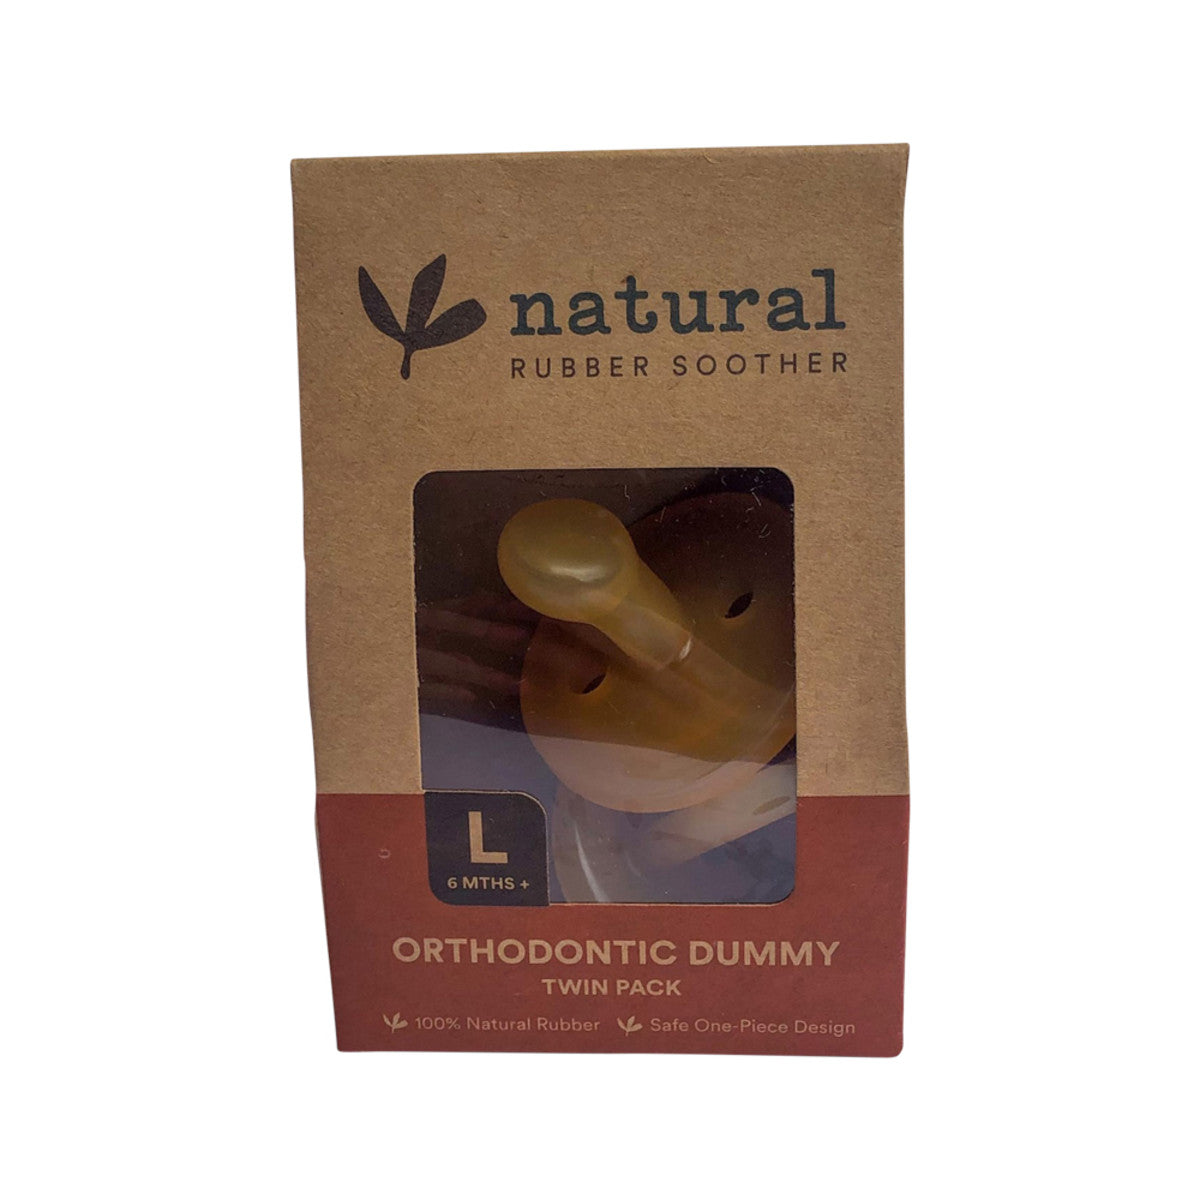 Natural Rubber Soother - Orthodontic Dummy Large (6+ Months) Twin Pack